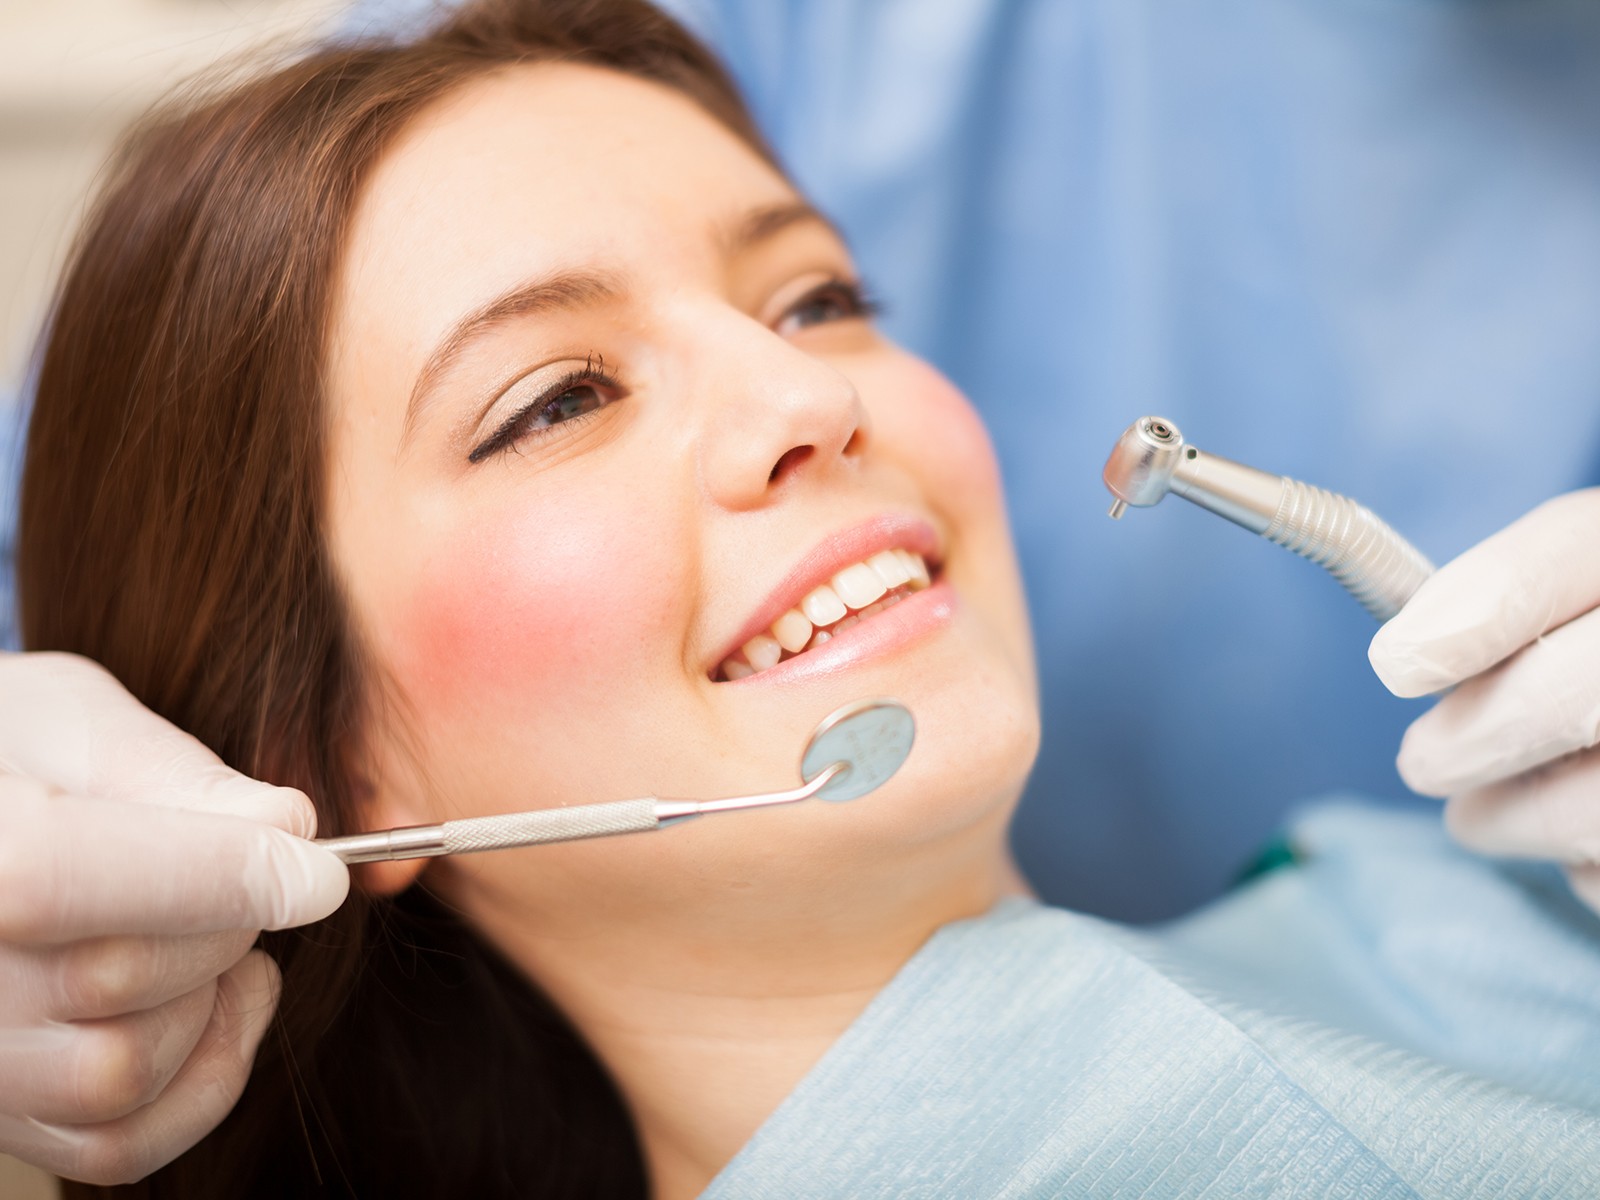 What role does dental hygiene play in oral health?